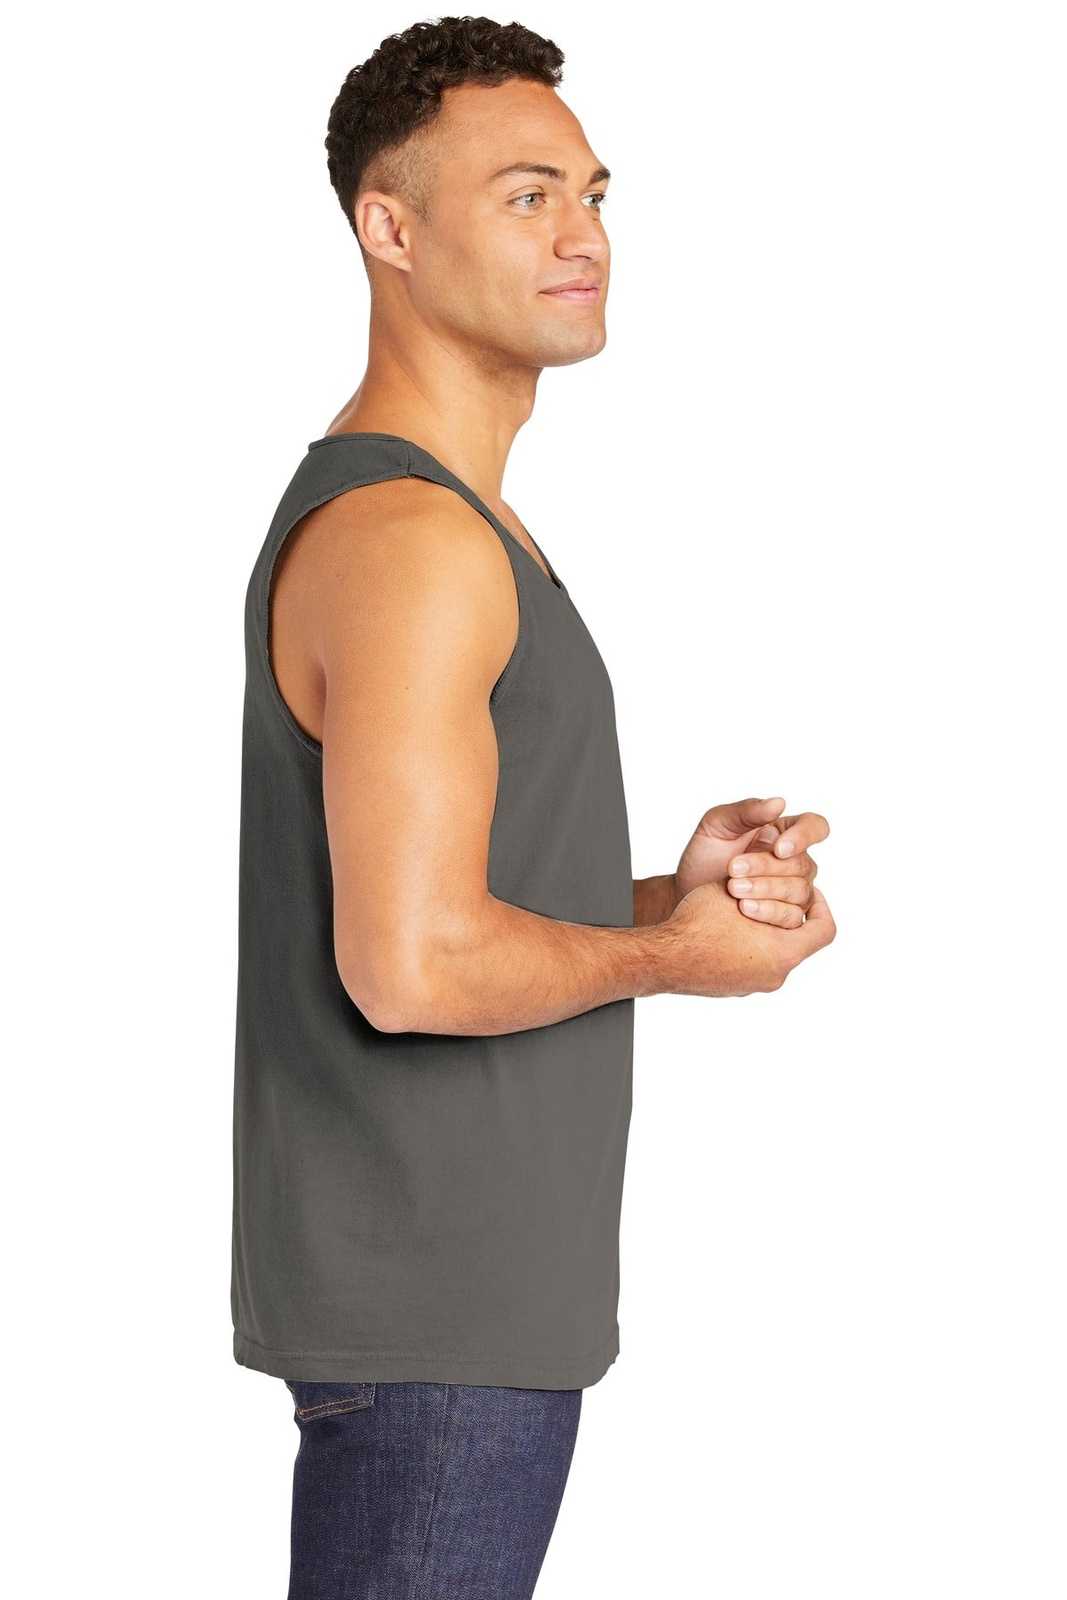 Comfort Colors 9360 Heavyweight Ring Spun Tank Top - Gray - HIT a Double